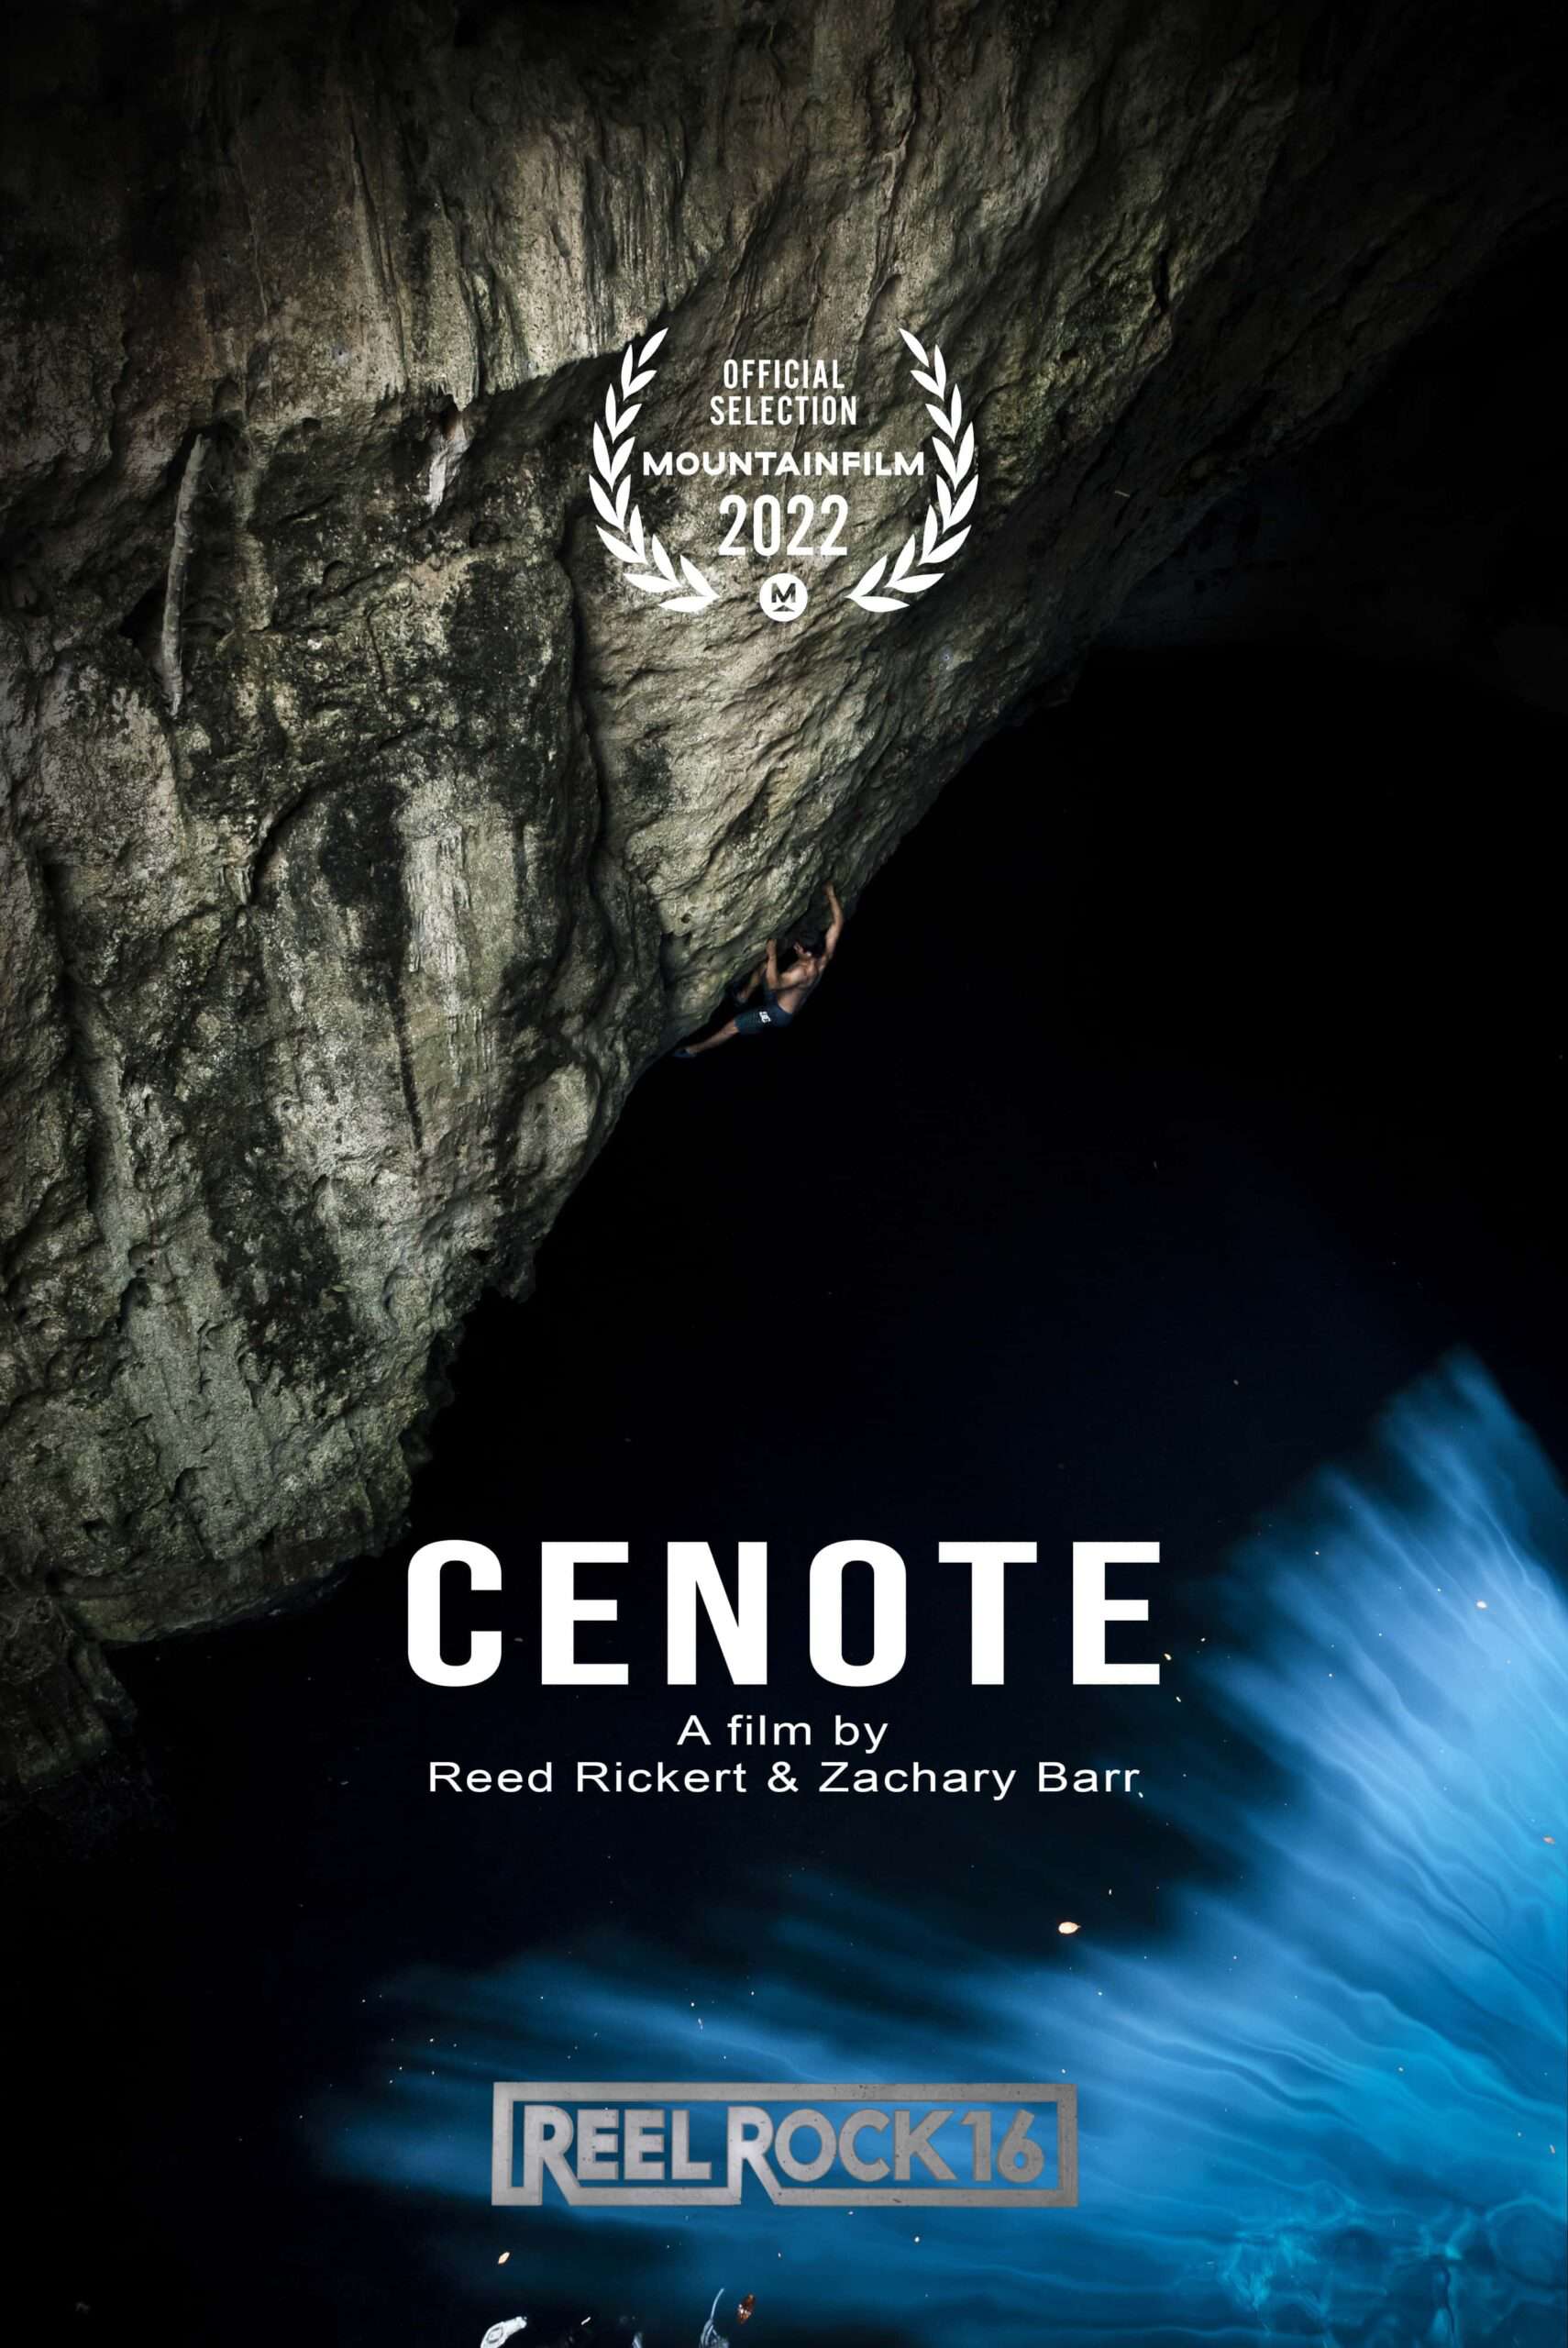 ‘Cenote’ is official selection at Mountainfilm Festival Telluride 2022